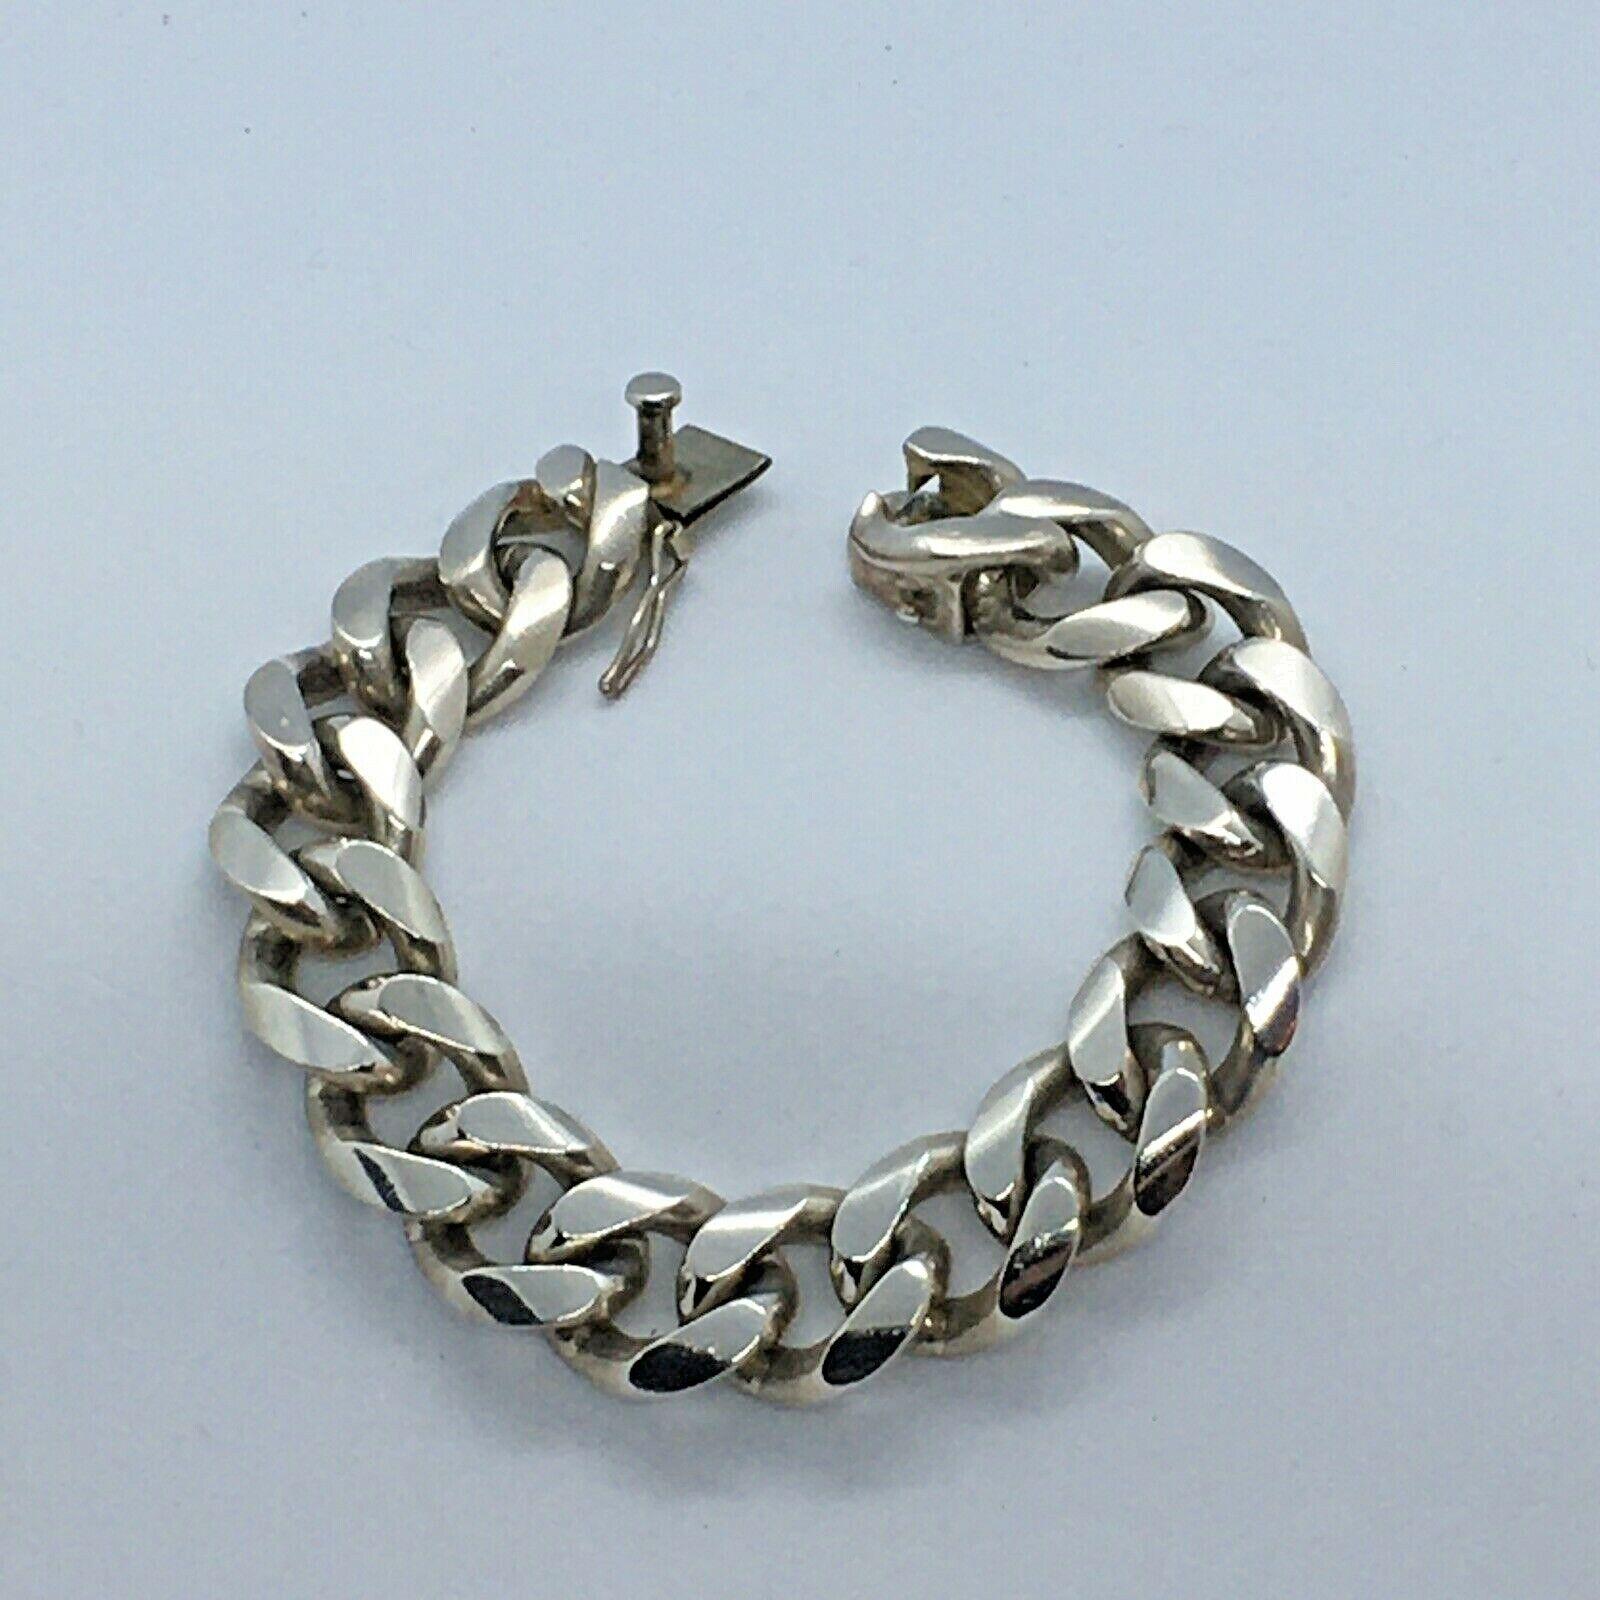 Vintage Tiffany & Co Sterling Silver Marked 925 Cuban Curb Link Bracelet 

Length 6.5 inch
Condition Preowned gentle wear and tear 
Hallmarks 